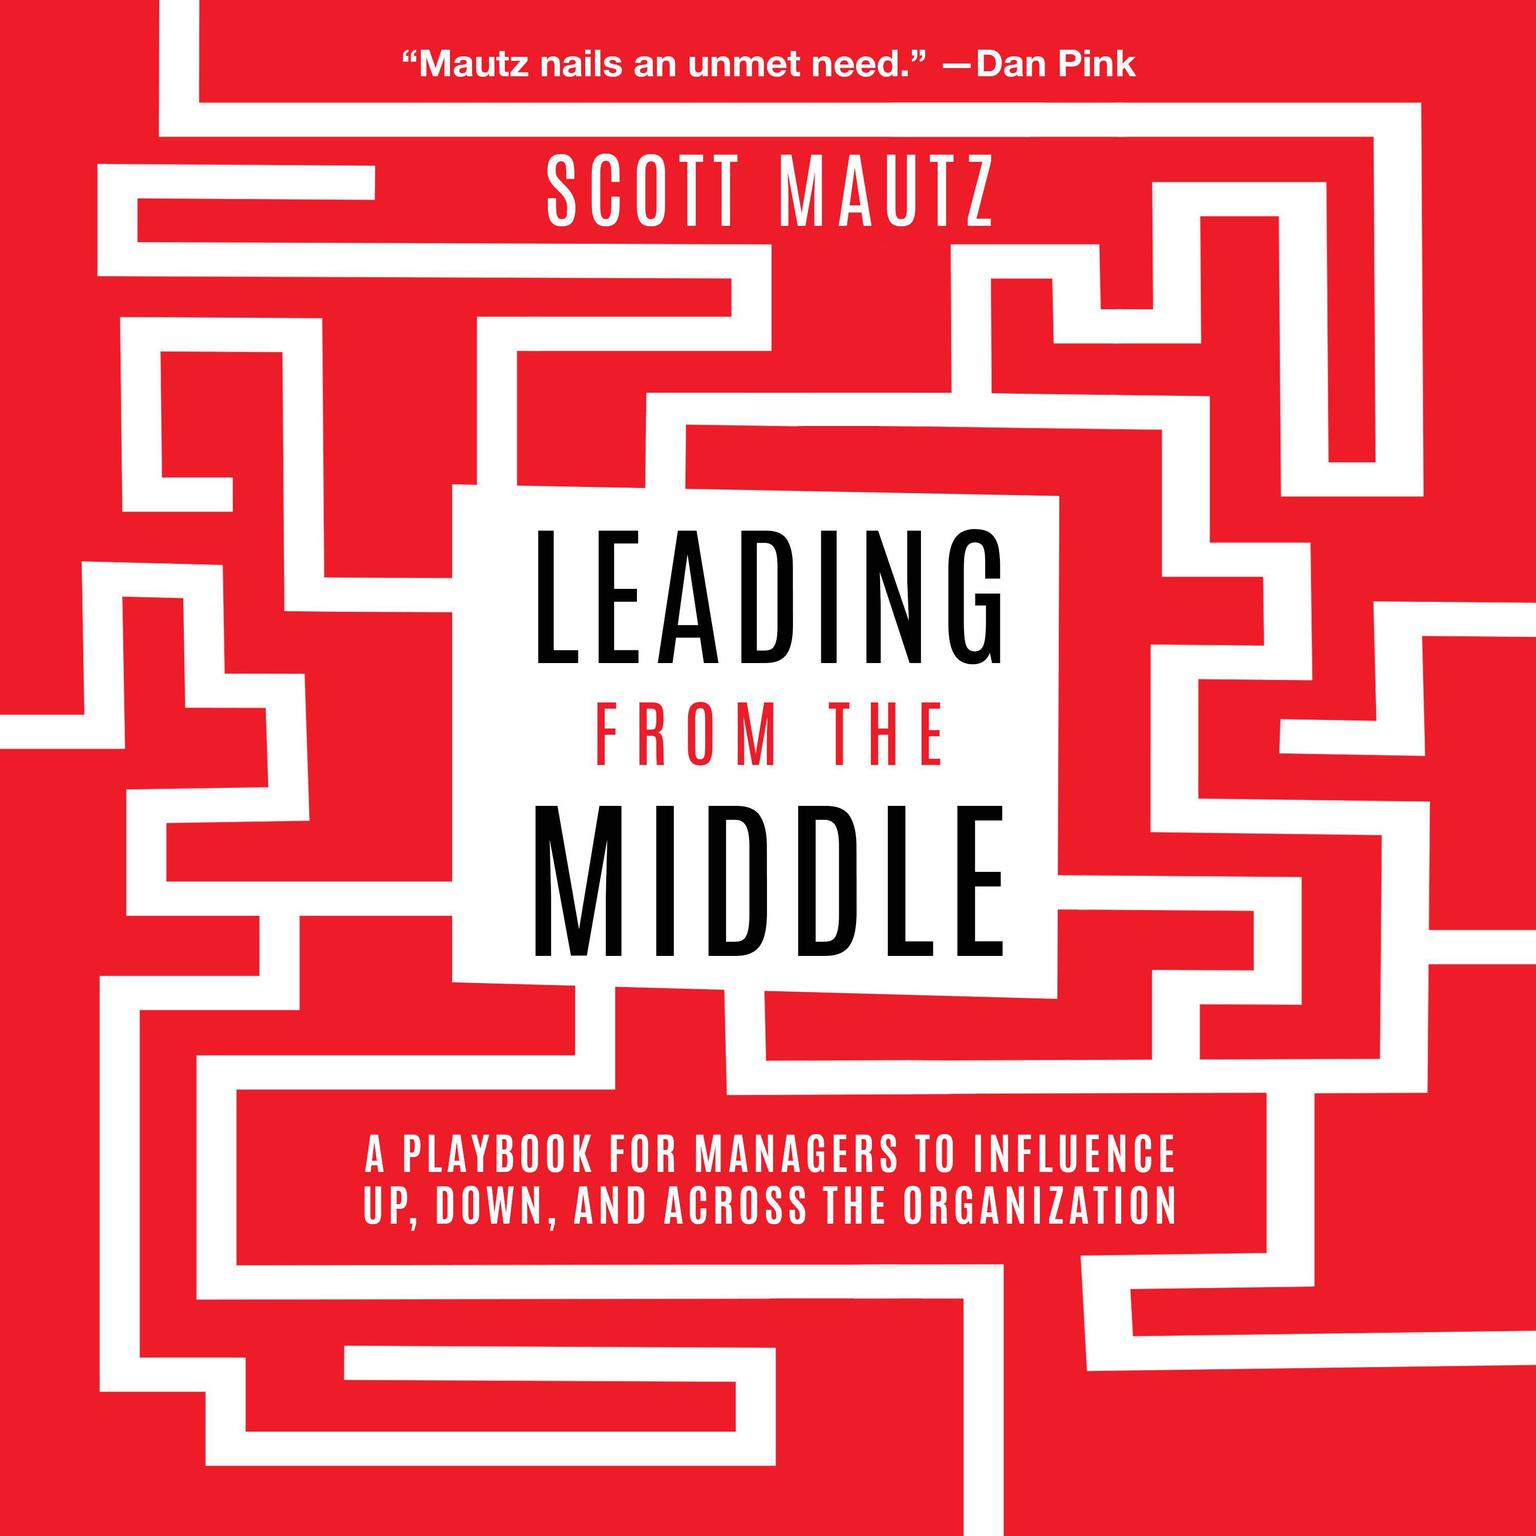 Leading from the Middle: A Playbook for Managers to Influence Up, Down, and Across the Organization Audiobook, by Scott Mautz